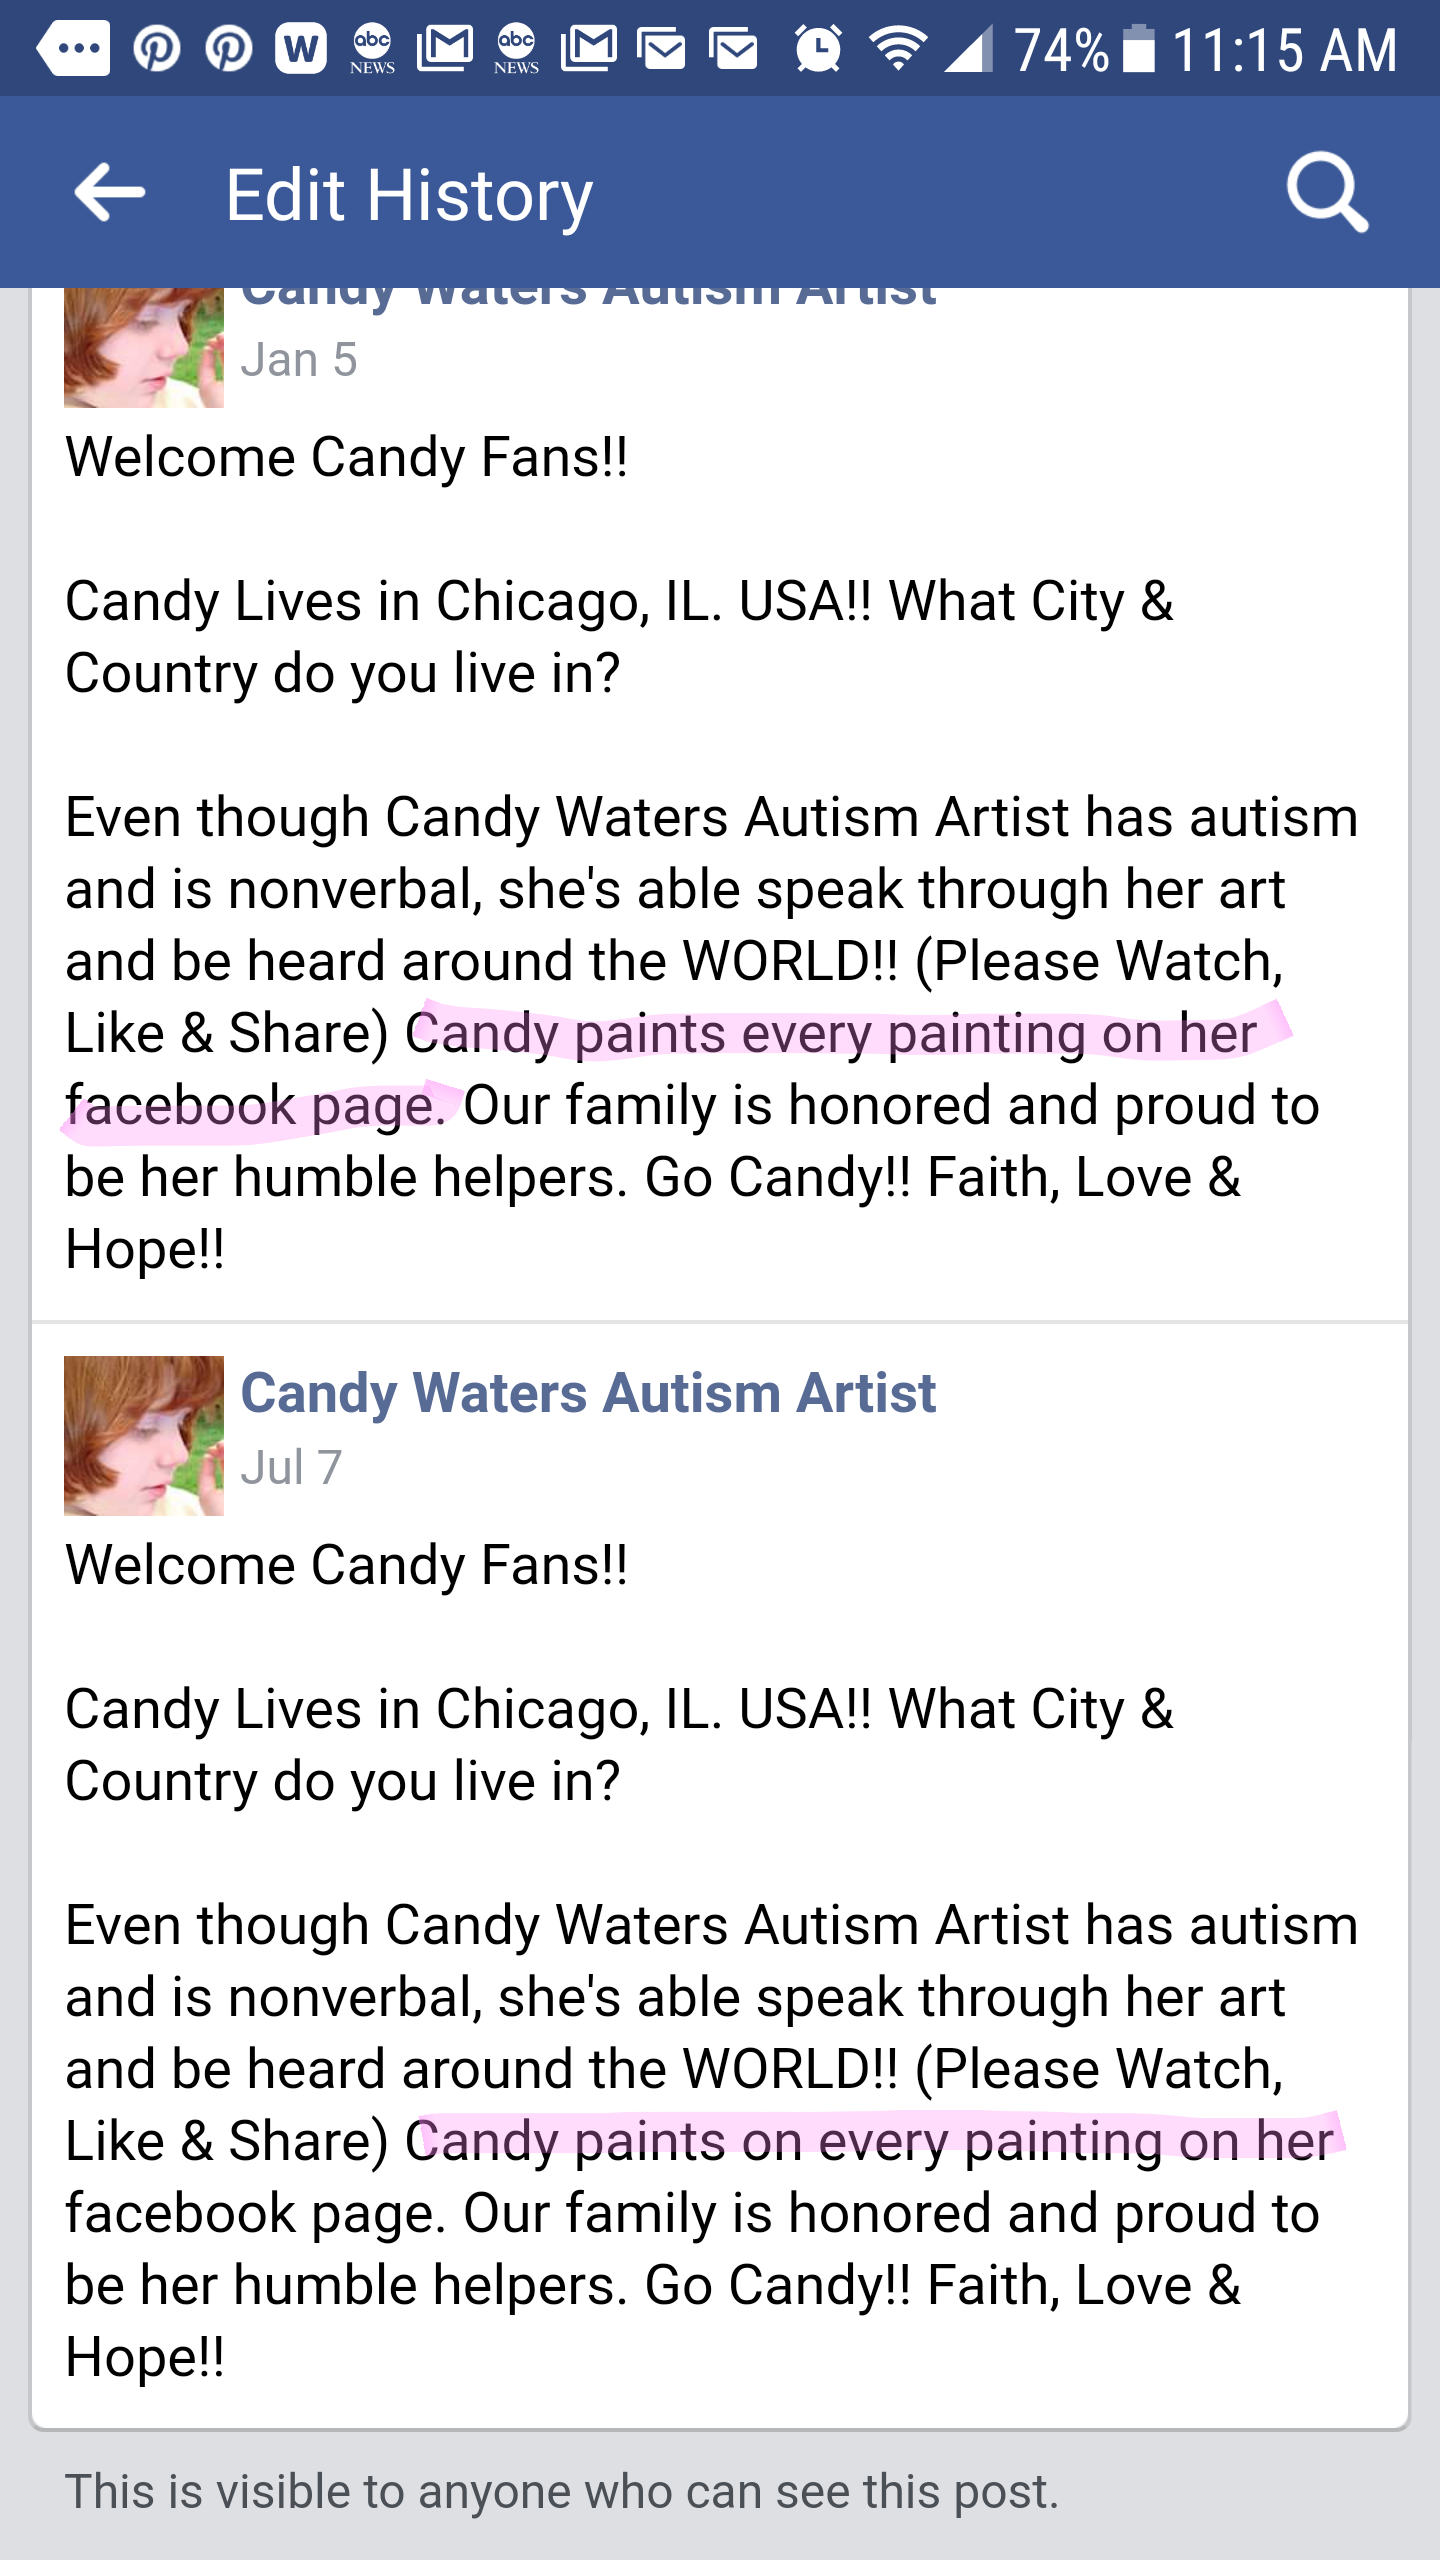 The deception: Candy paints ON every painting on her Facebook page.